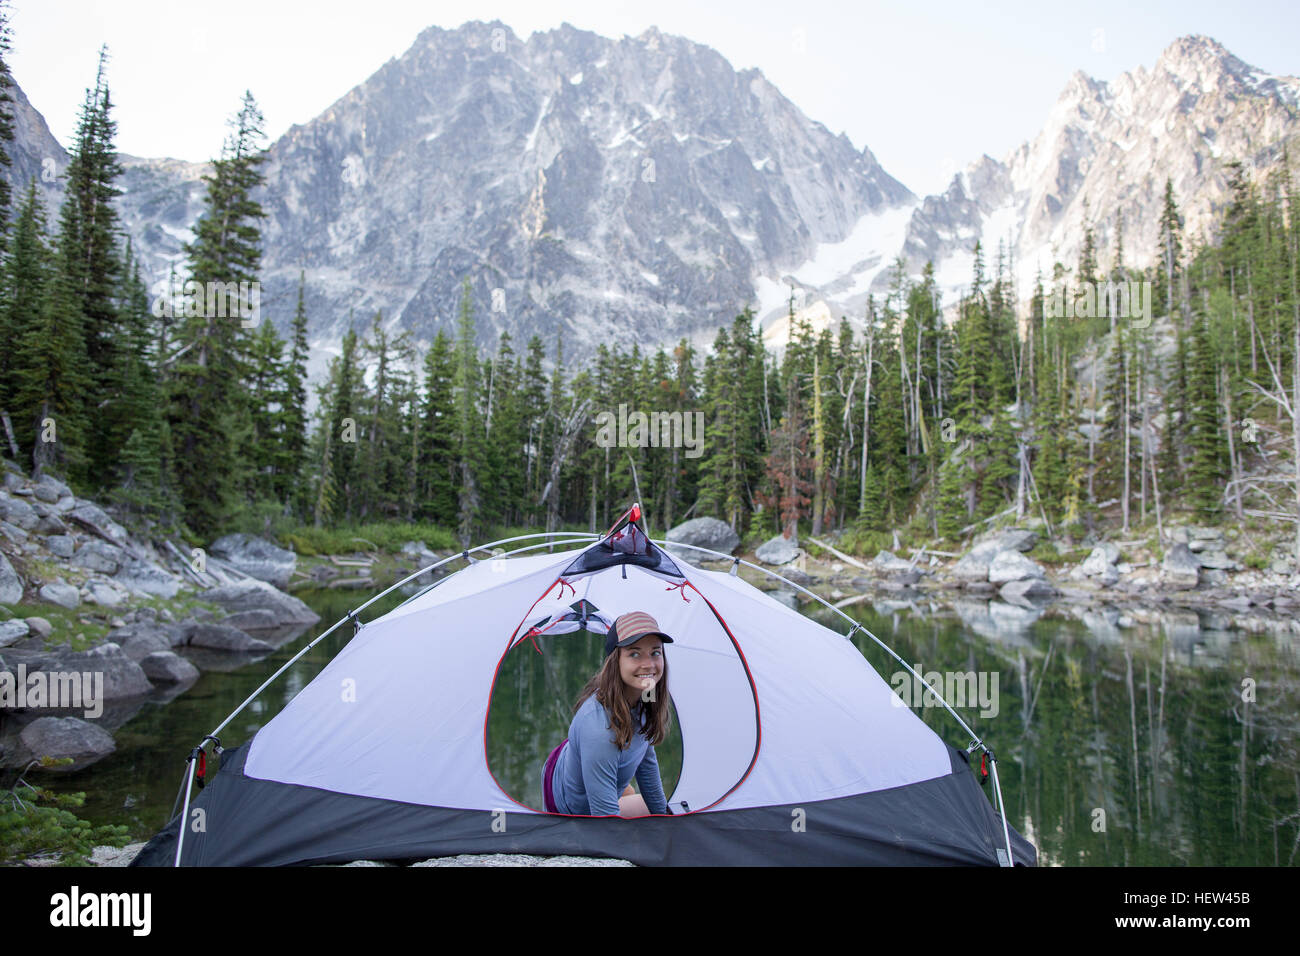 Young woman sitting in tent beside lake, The Enchantments, Alpine Lakes Wilderness, Washington, USA Stock Photo